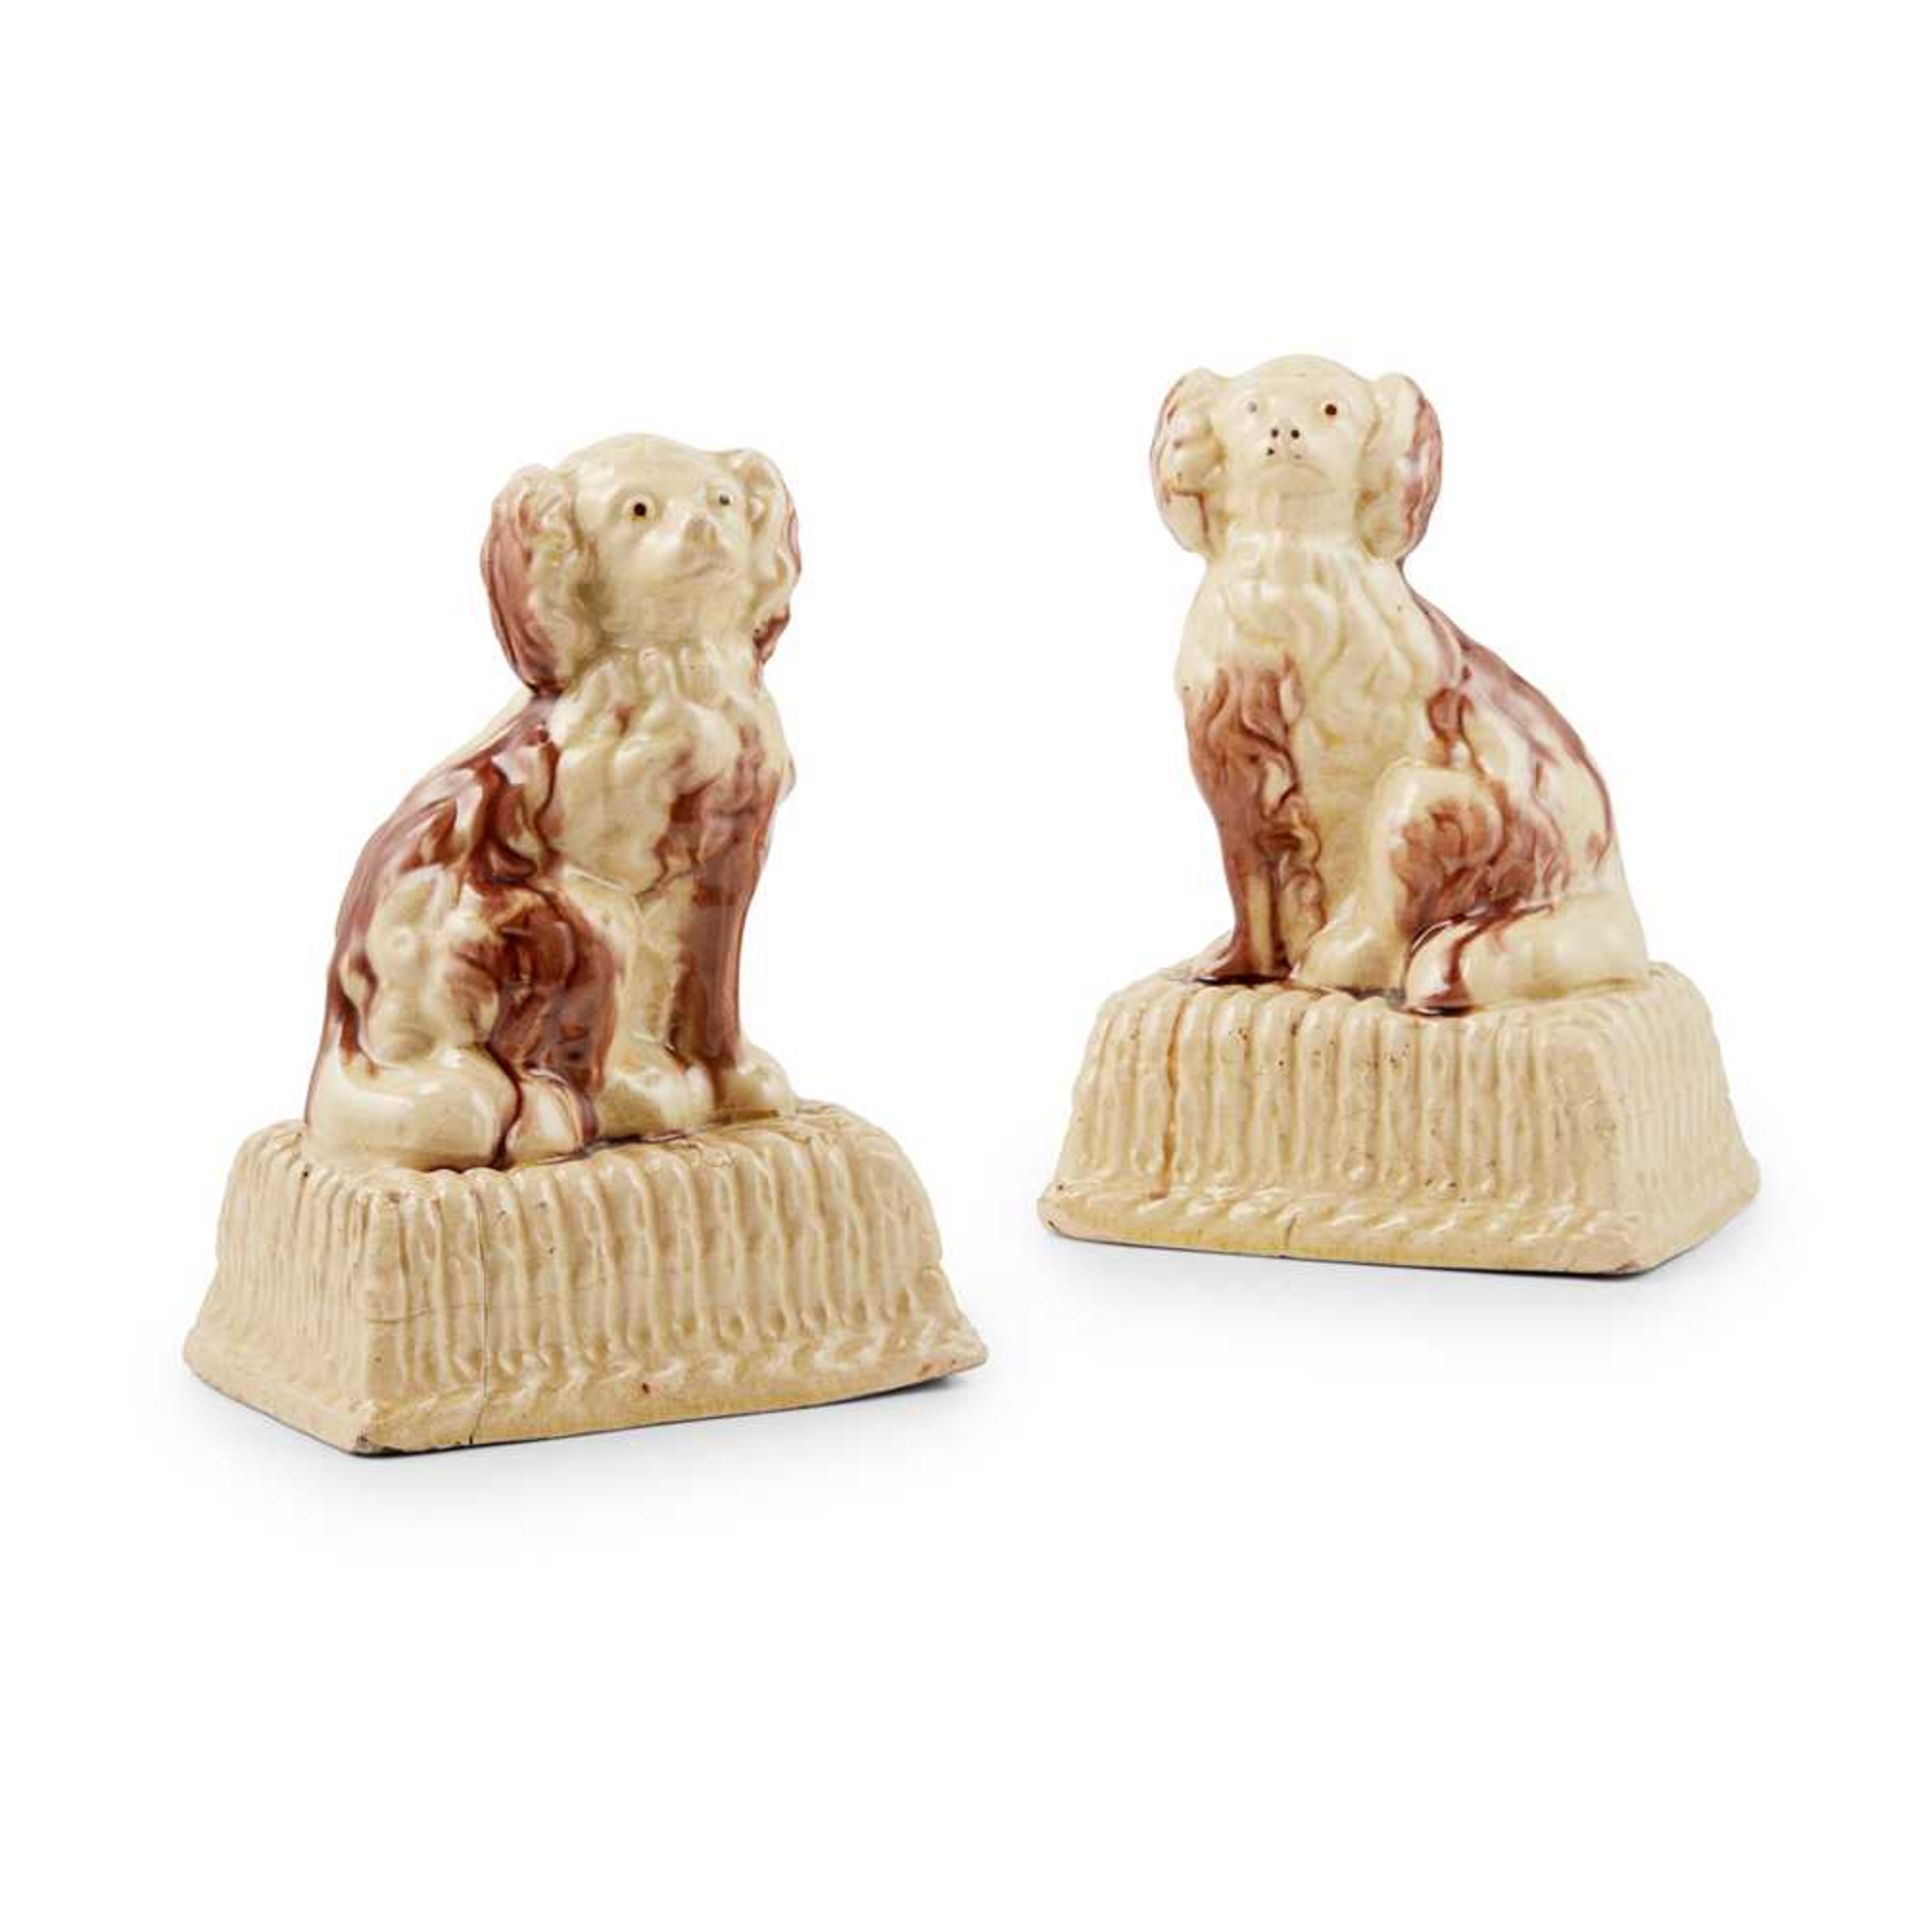 A PAIR OF SCOTTISH GLAZED POTTERY SPANIELS LATE 18TH CENTURY - Image 2 of 2